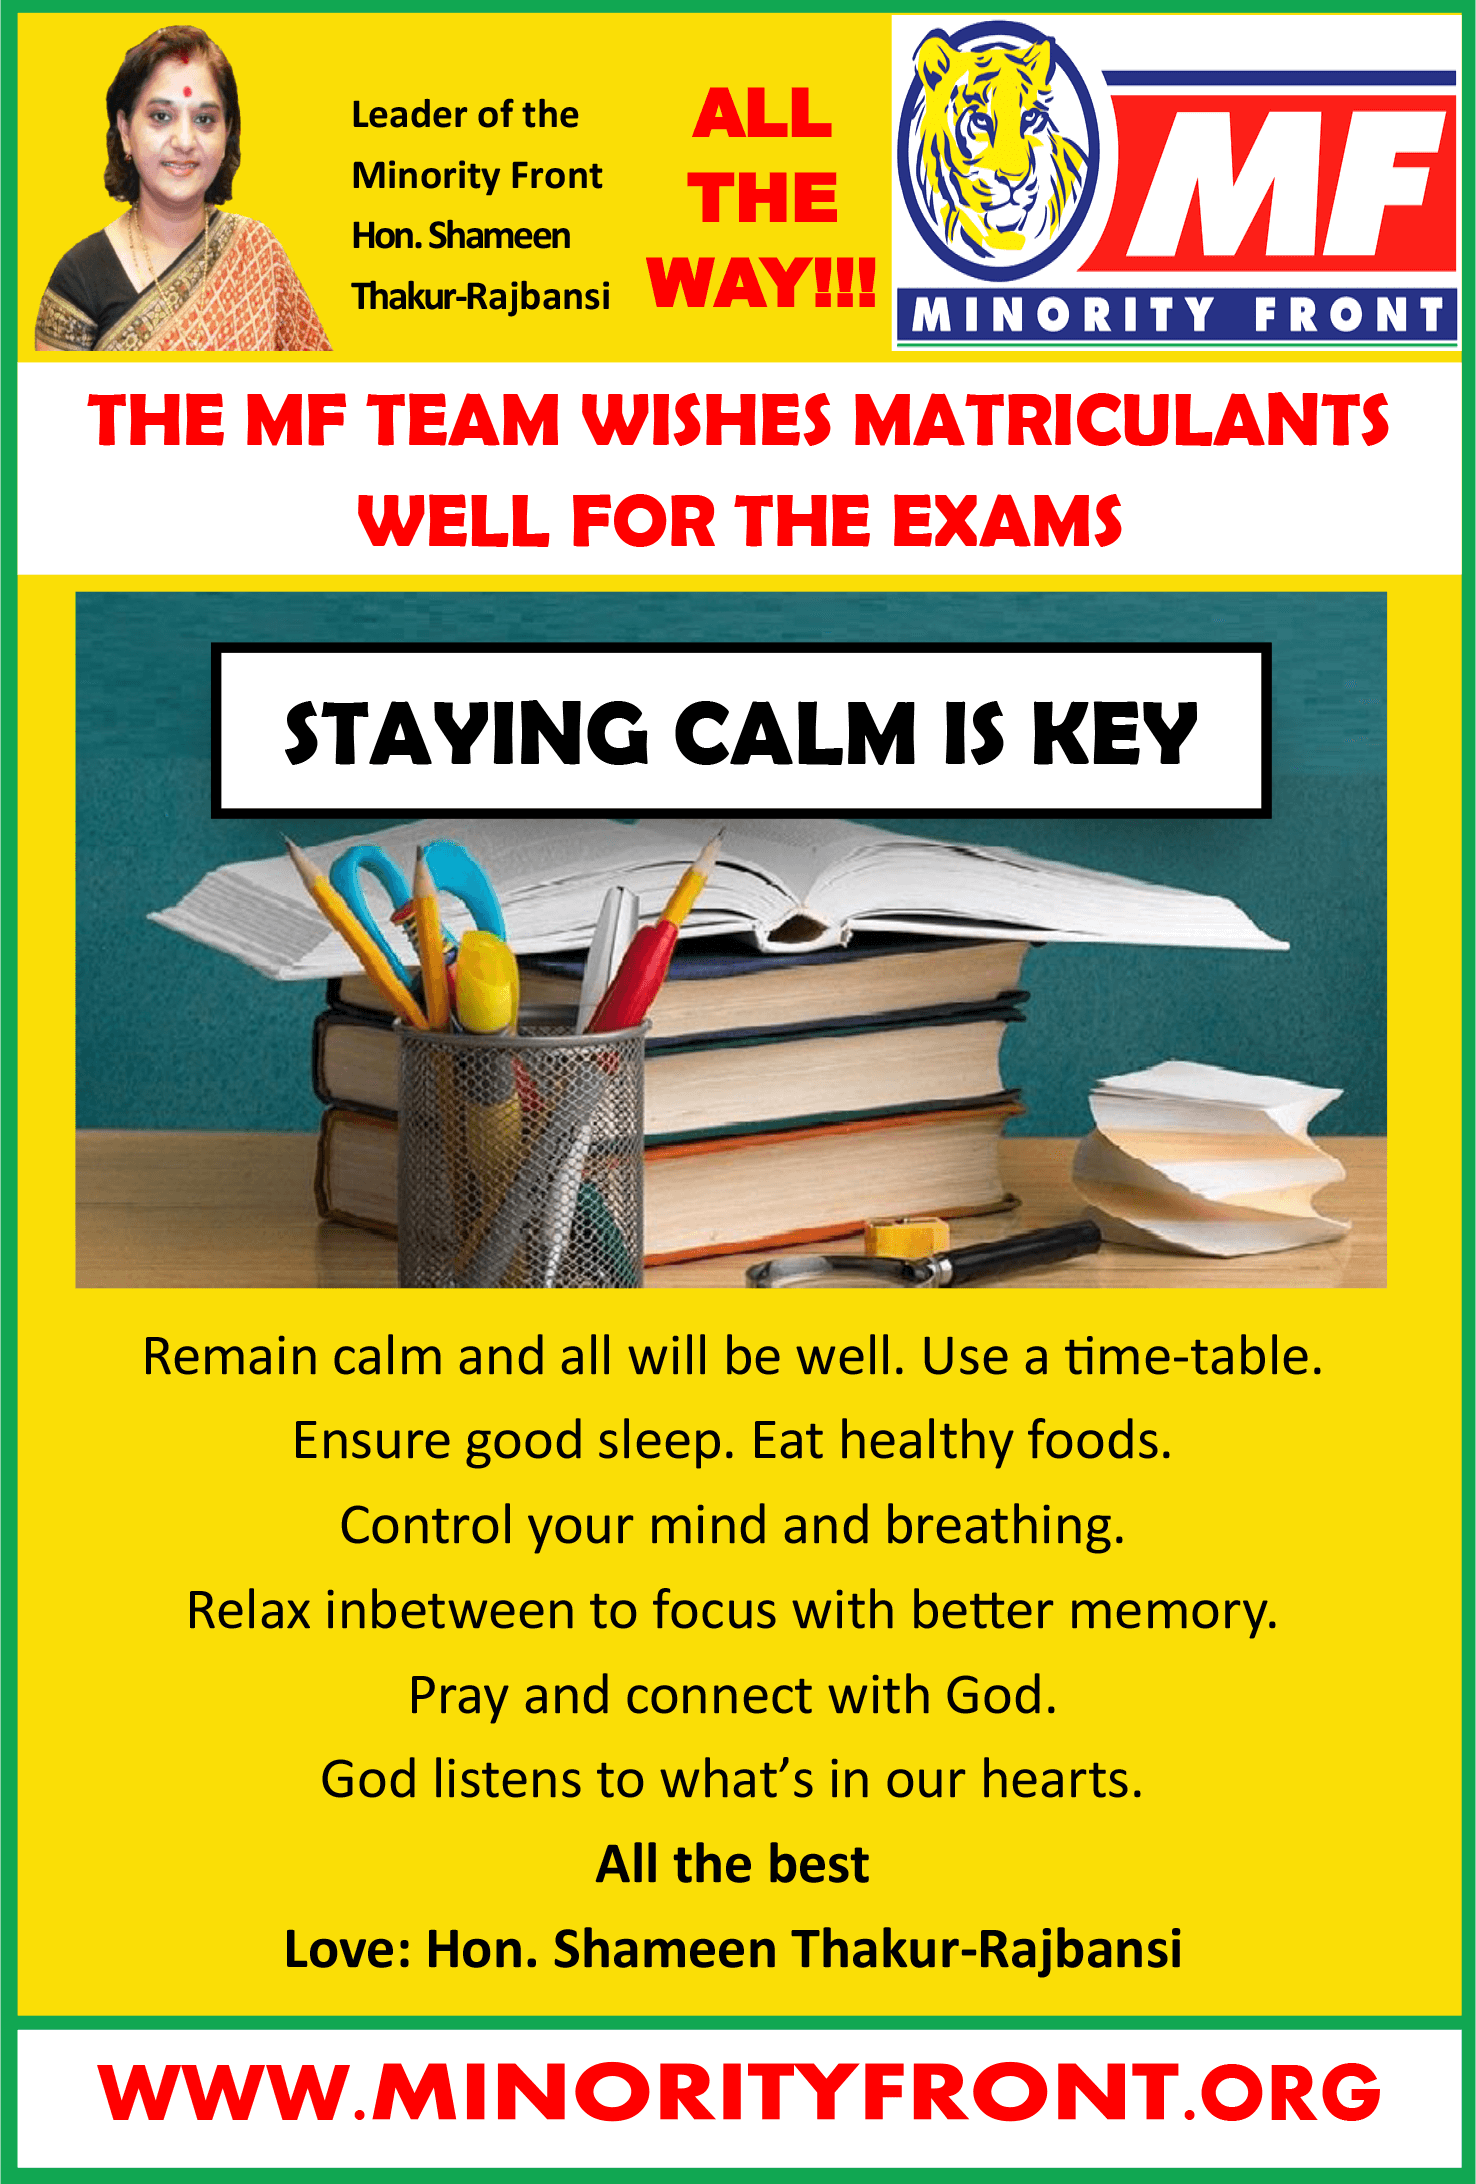 The MF Team Wishes Matriculants Well For The Exams